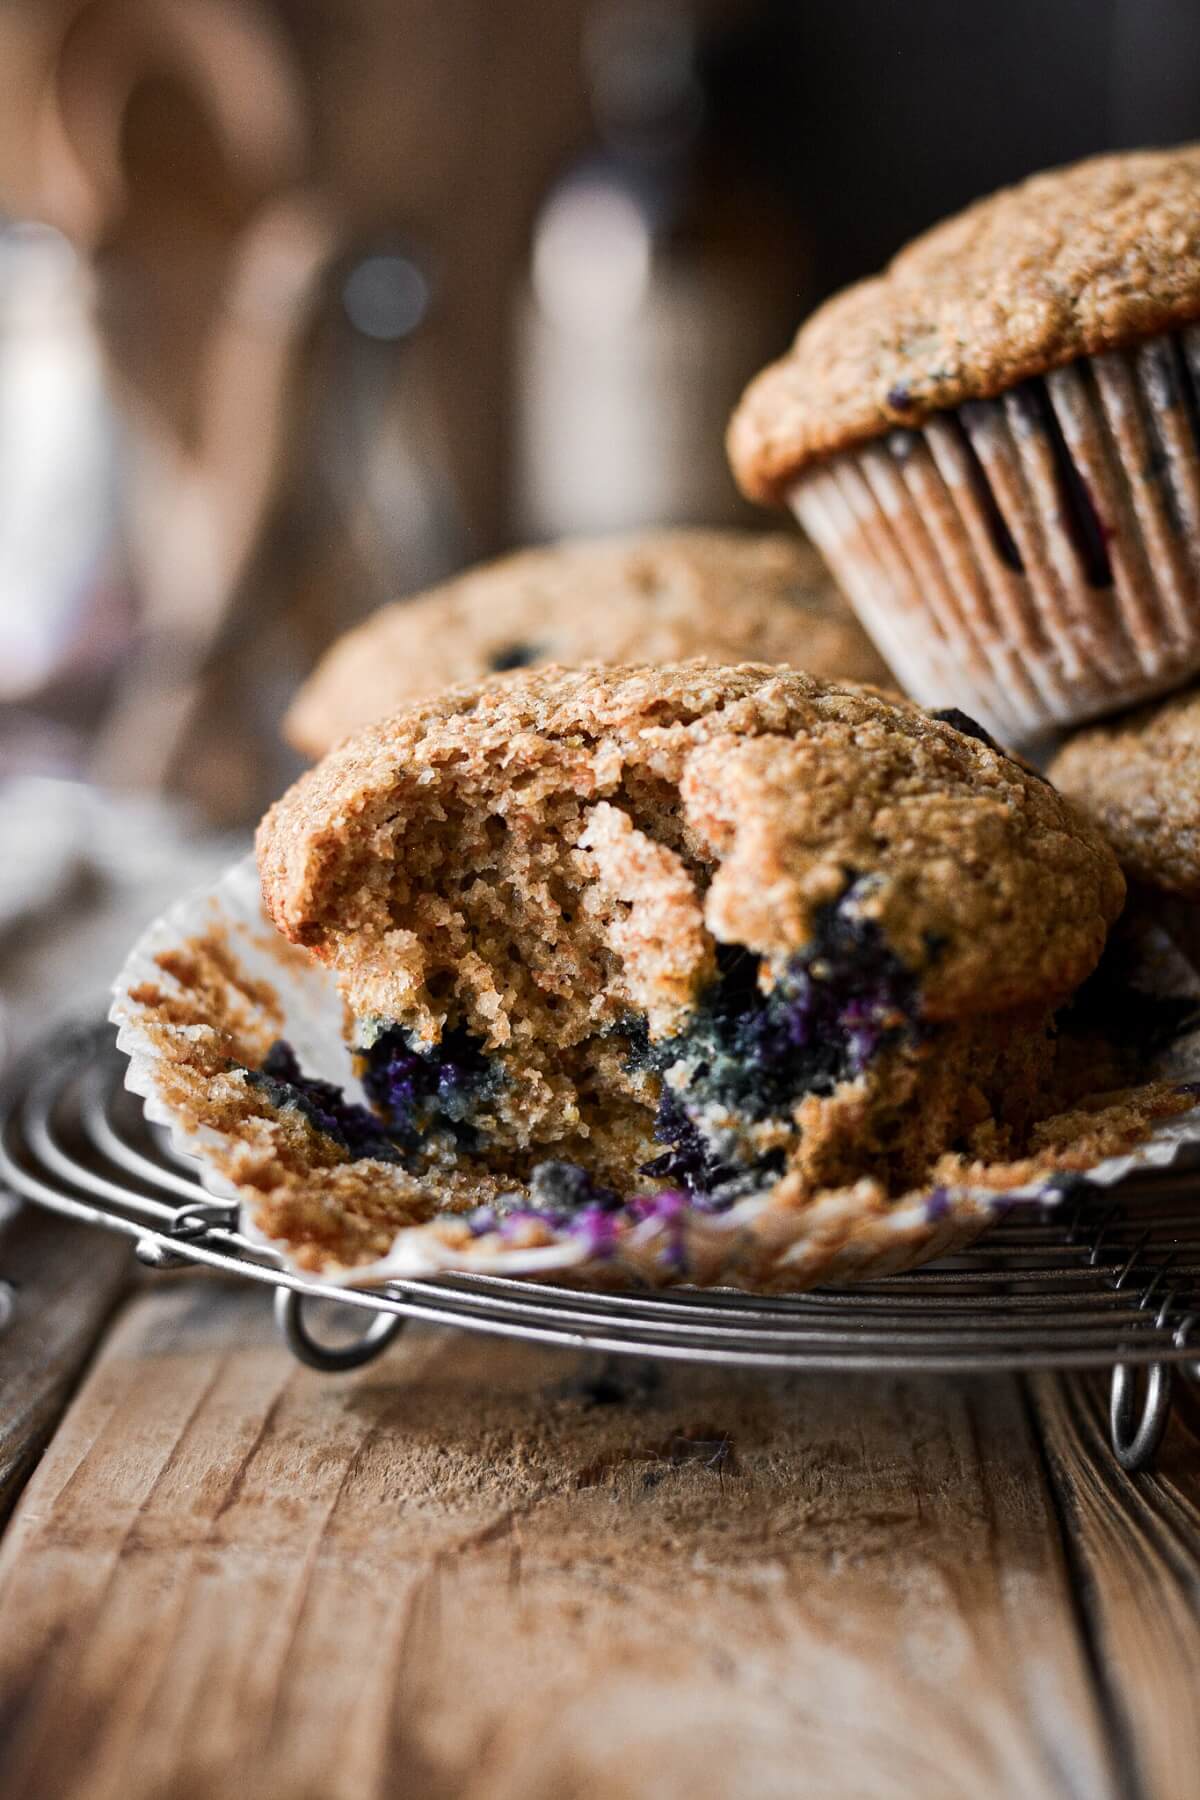 A maple blueberry bran muffin with a bite taken.